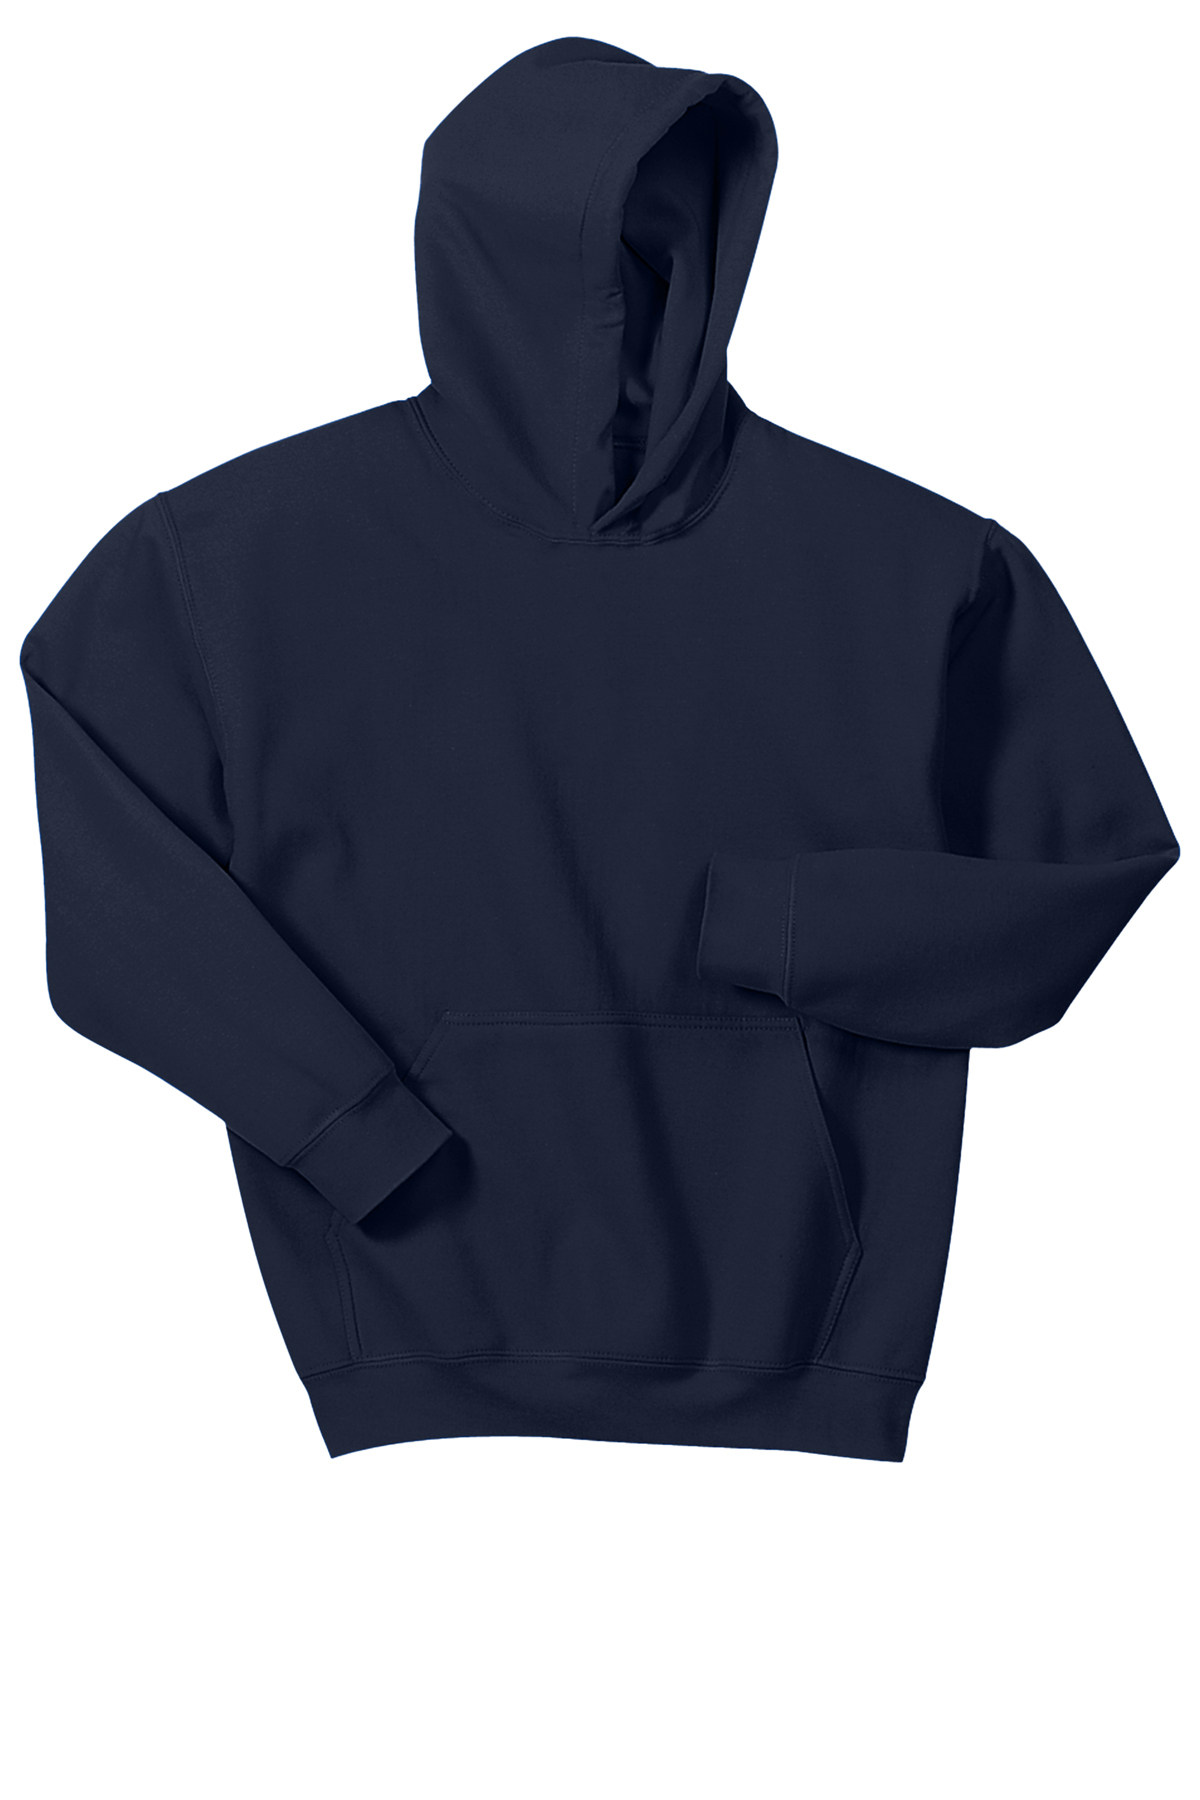 Hooded Navy color sweat shirt with Logo.